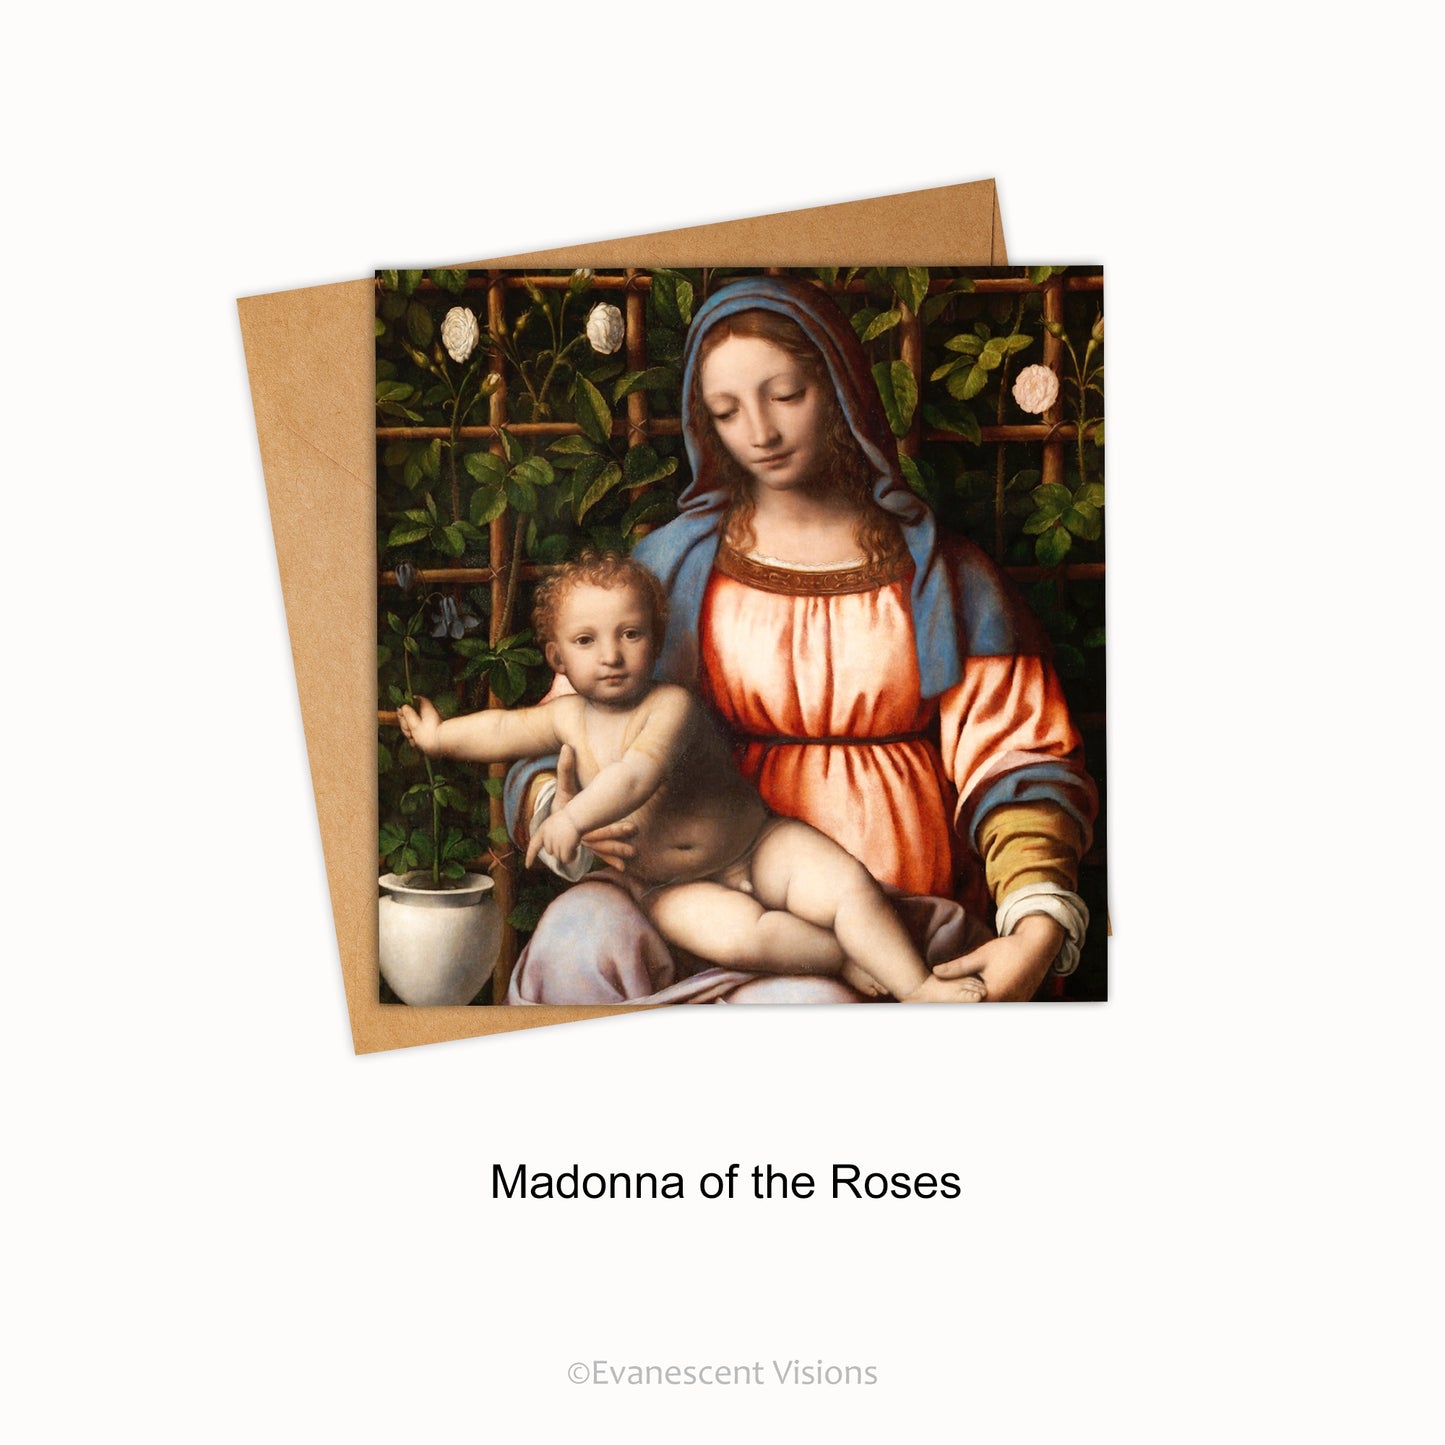 Madonna of the Roses design Renaissance Madonna and Child Christmas Religious Greeting Card